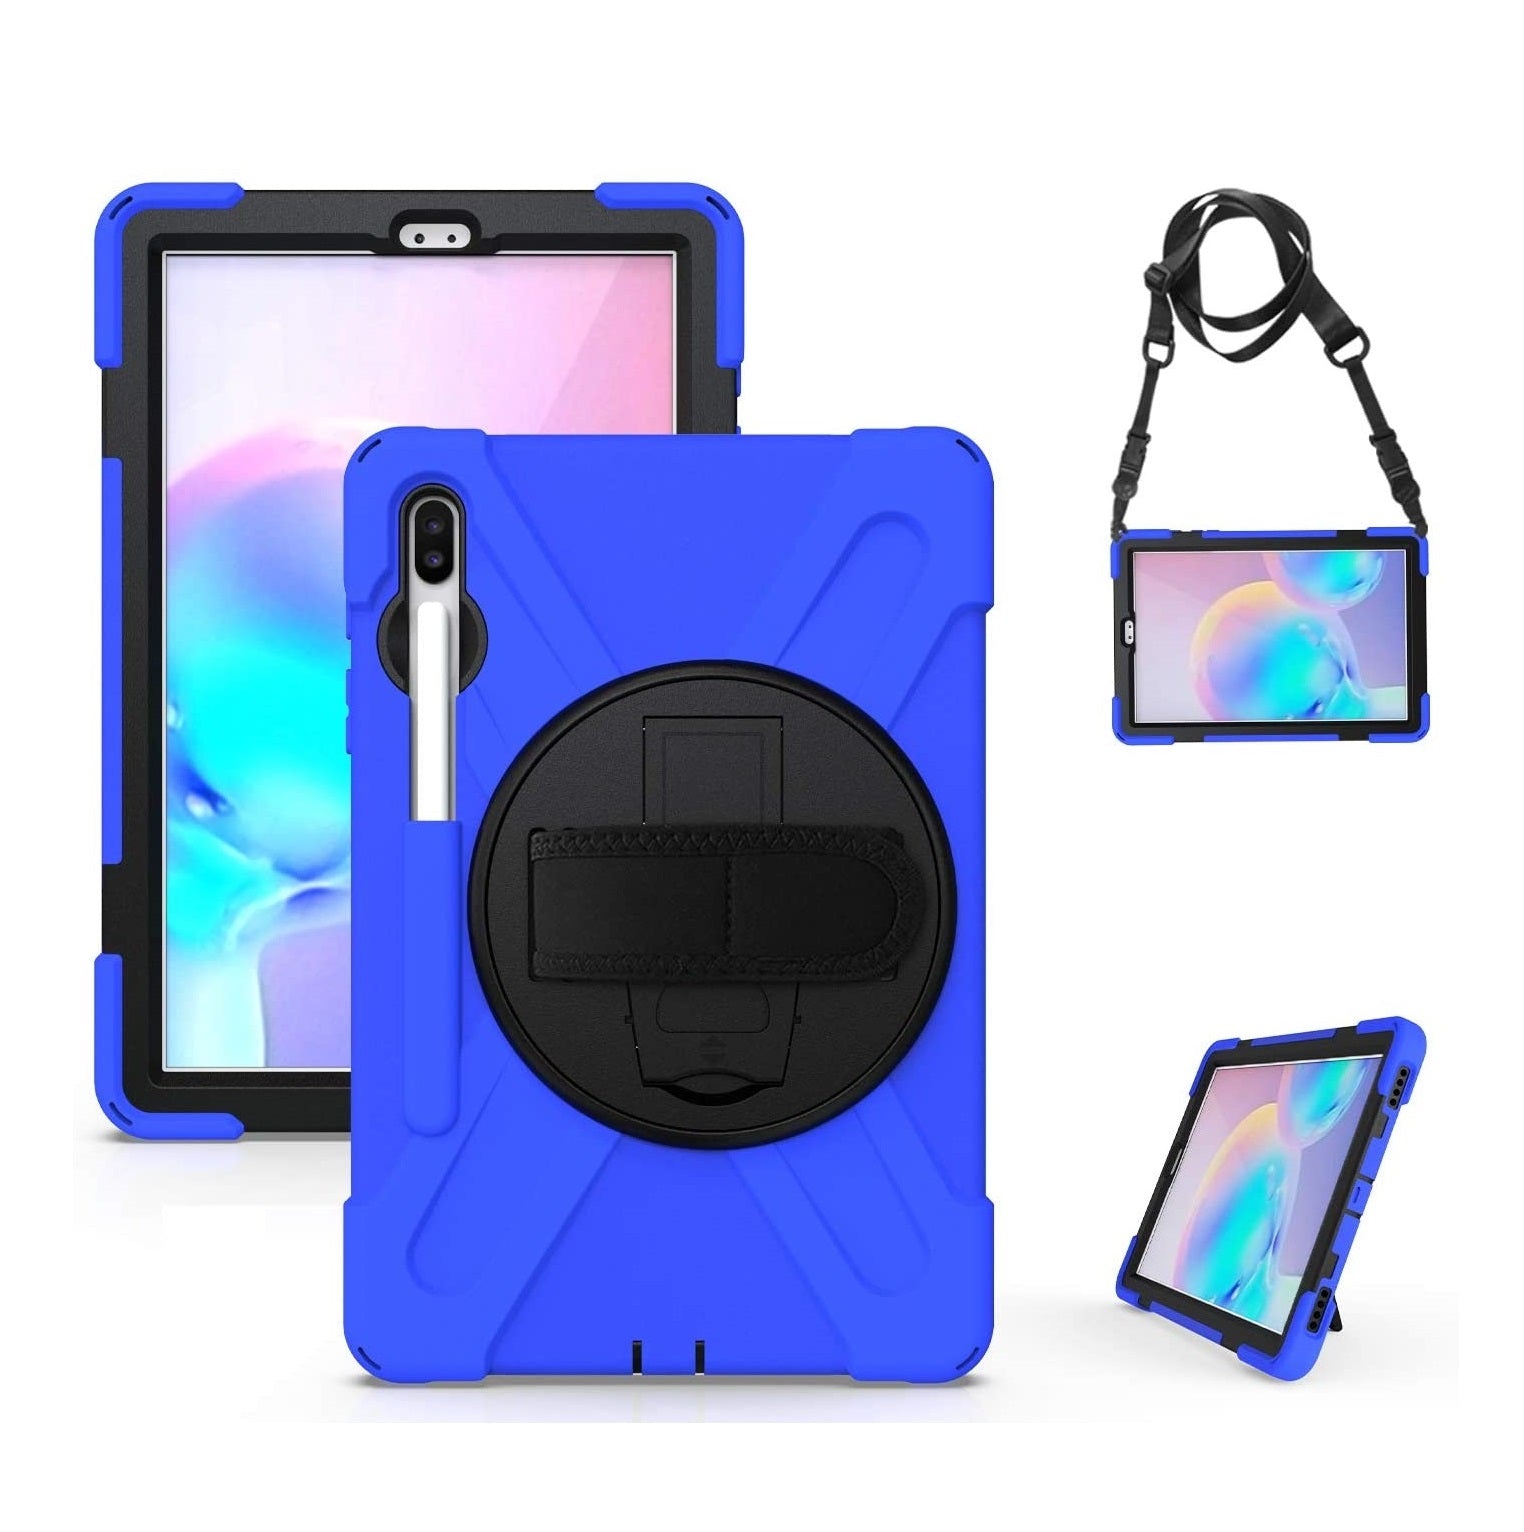 https://caserace.net/products/rugged-heavy-duty-cover-for-samsung-galaxy-tab-s6-t860-with-strap-and-pencil-holder-blue